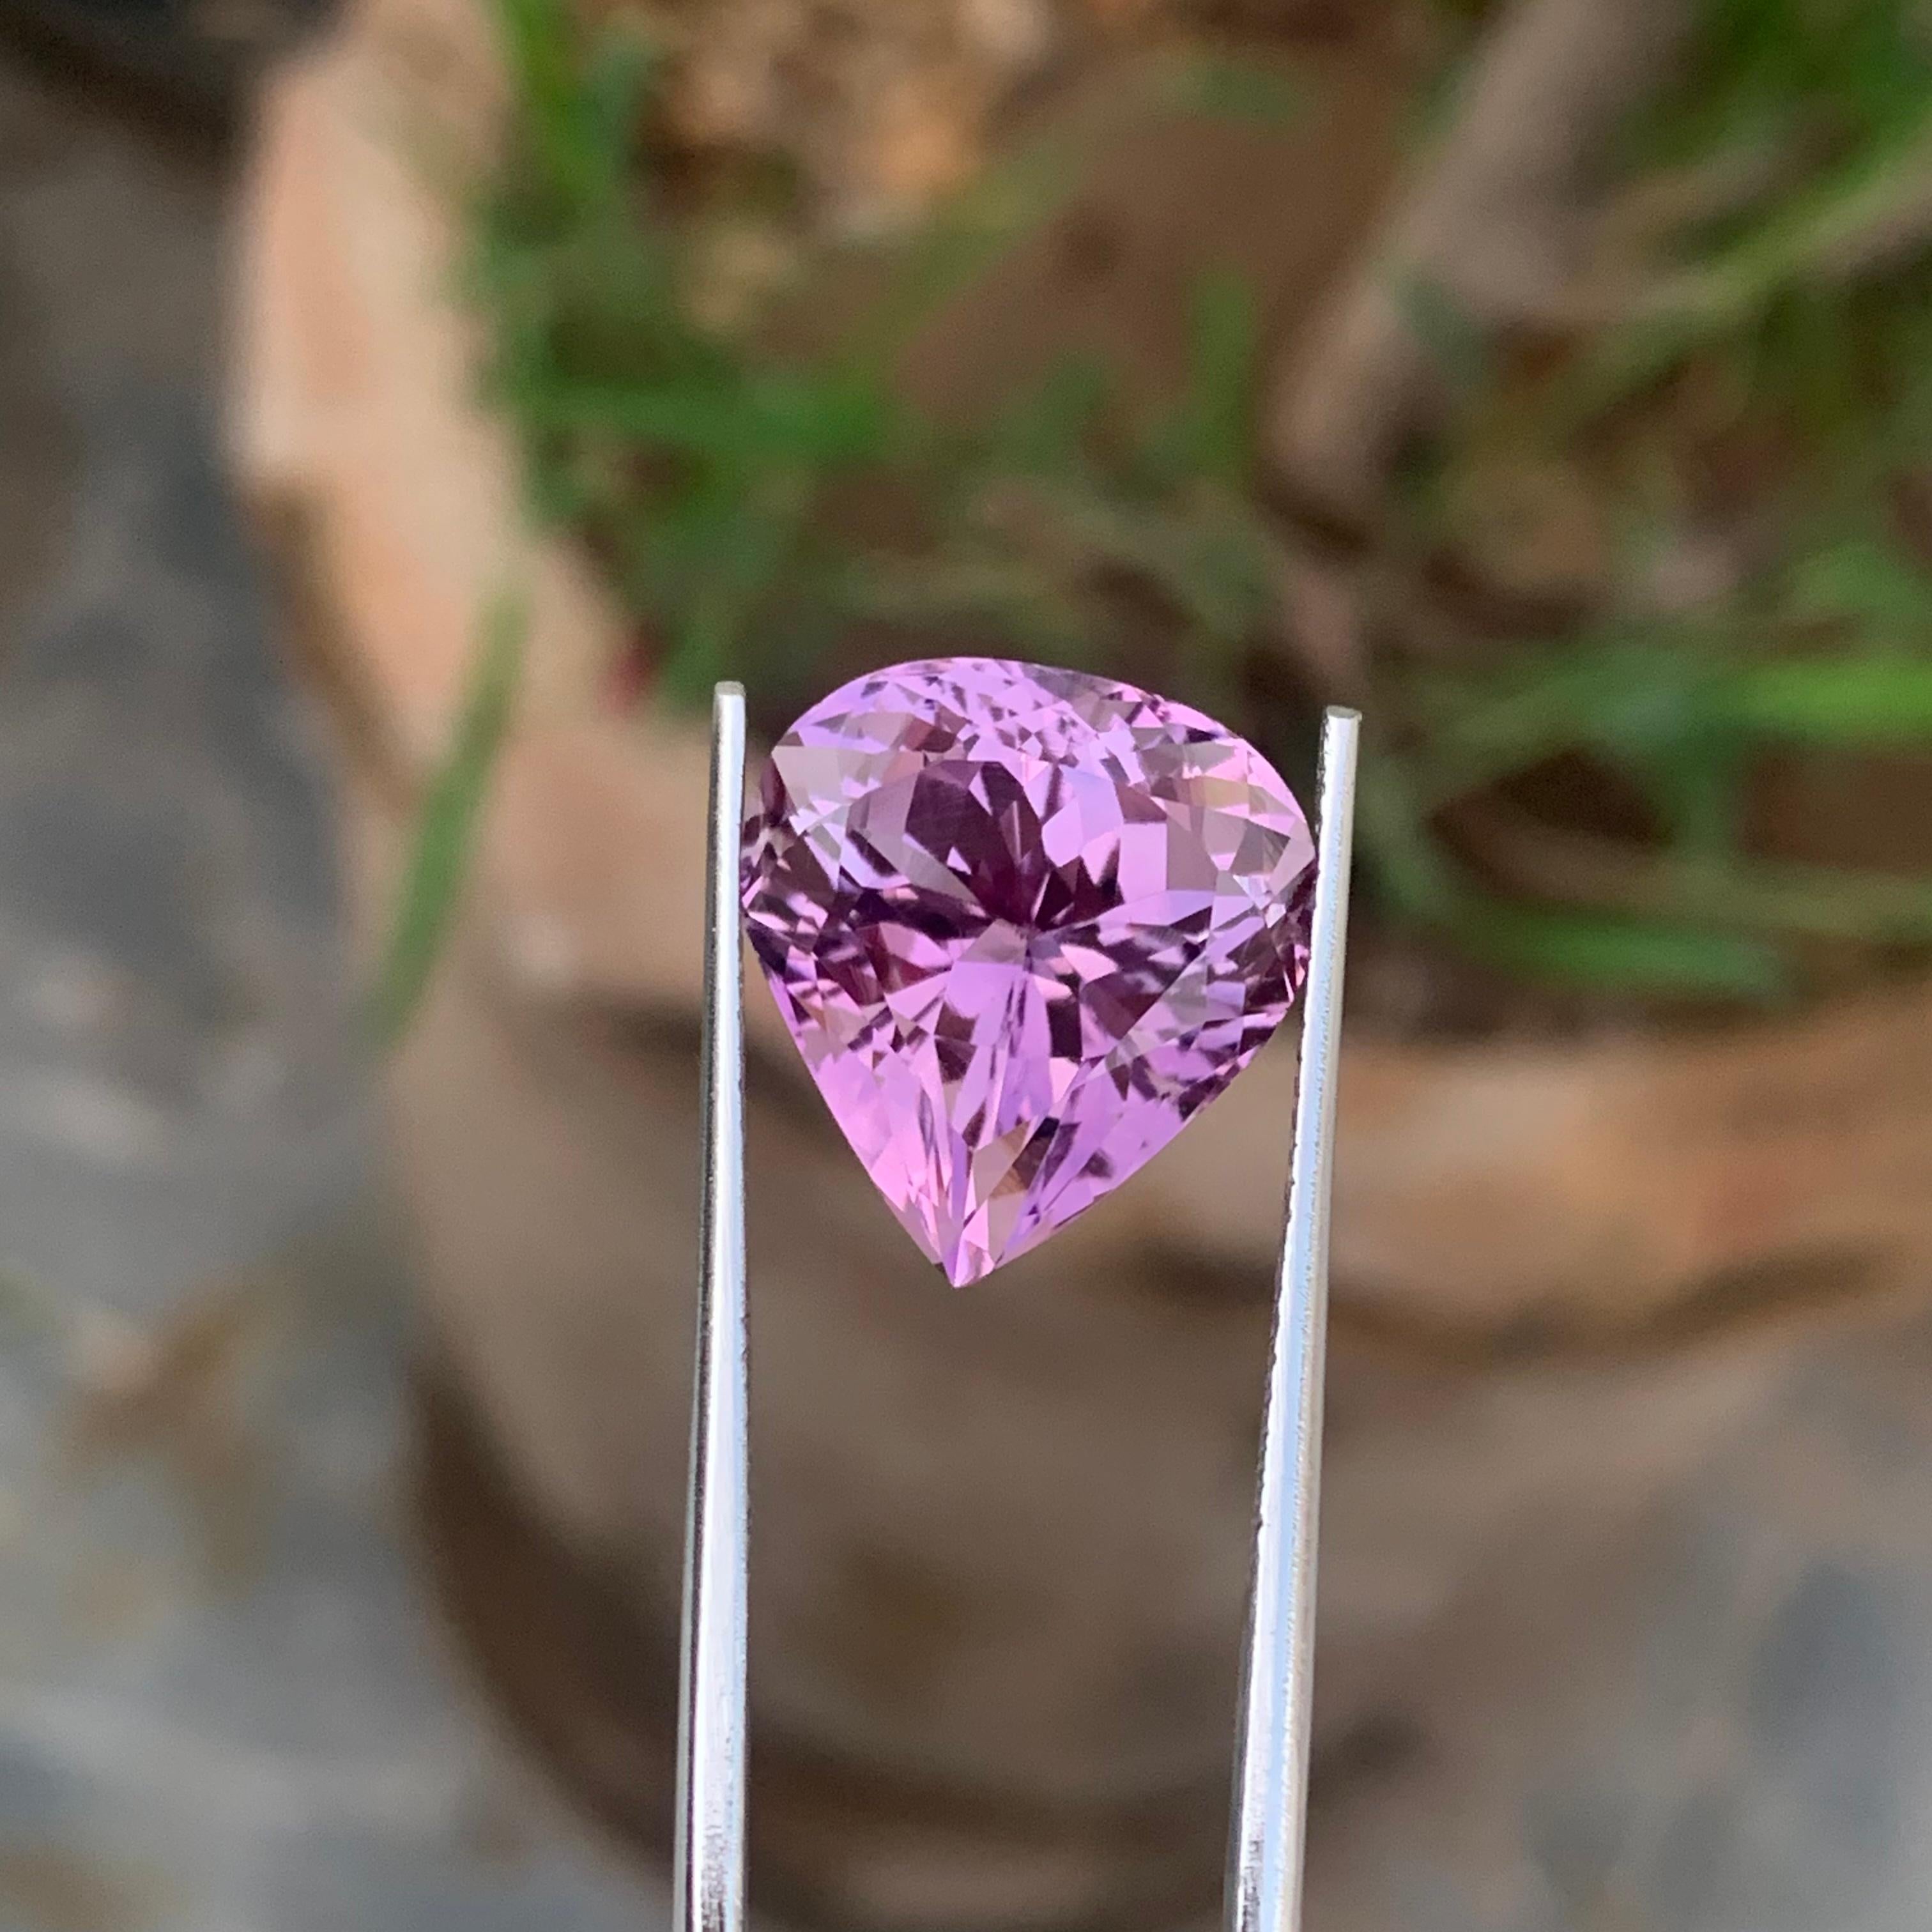 Gemstone Type : Amethyst
Weight : 12.30 Carats
Dimensions : 16.3x15x10.8 mm
Clarity : Eye Clean
Origin : Brazil
Color: Purple
Shape: Pear 
Facet: Fancy
Certificate: On Demand
Month: February

Purported amethyst powers for healing
enhancing the